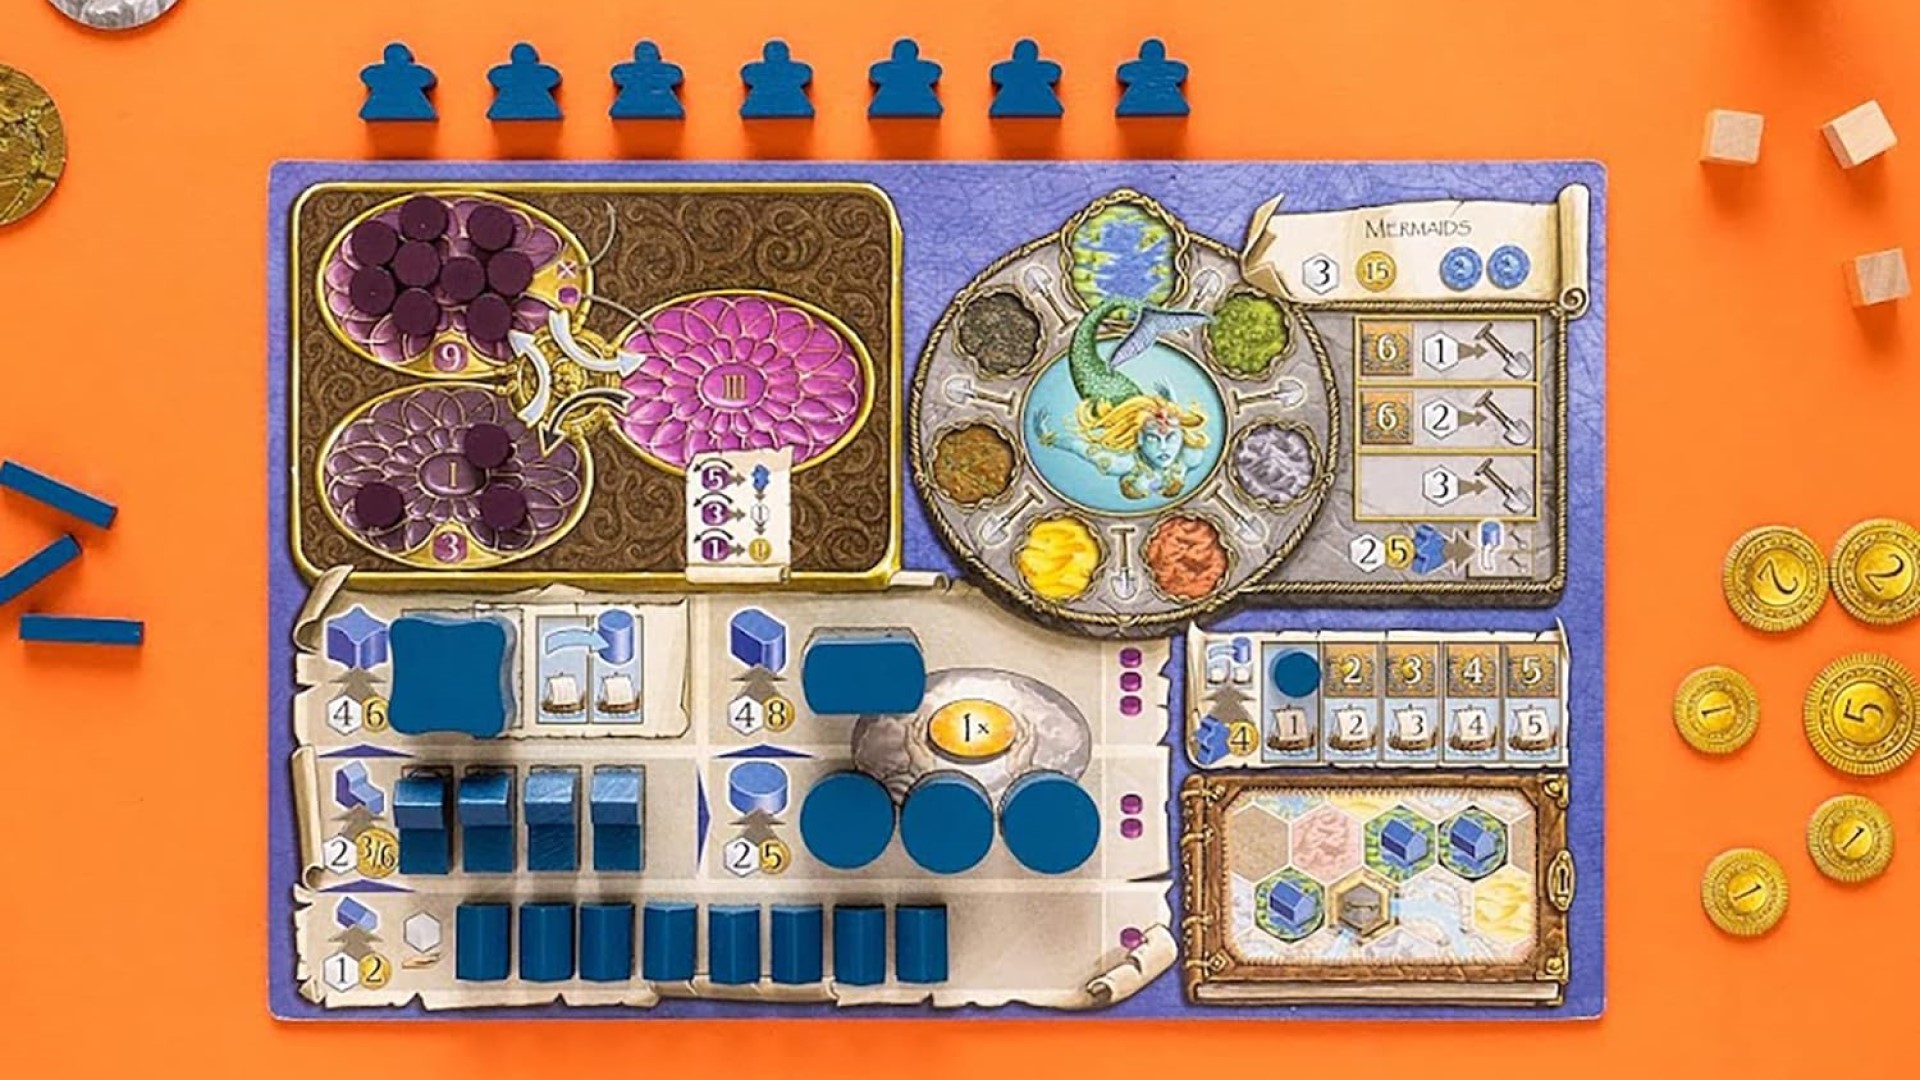 23 Board Games You Might Actually Be Bored Enough To Play